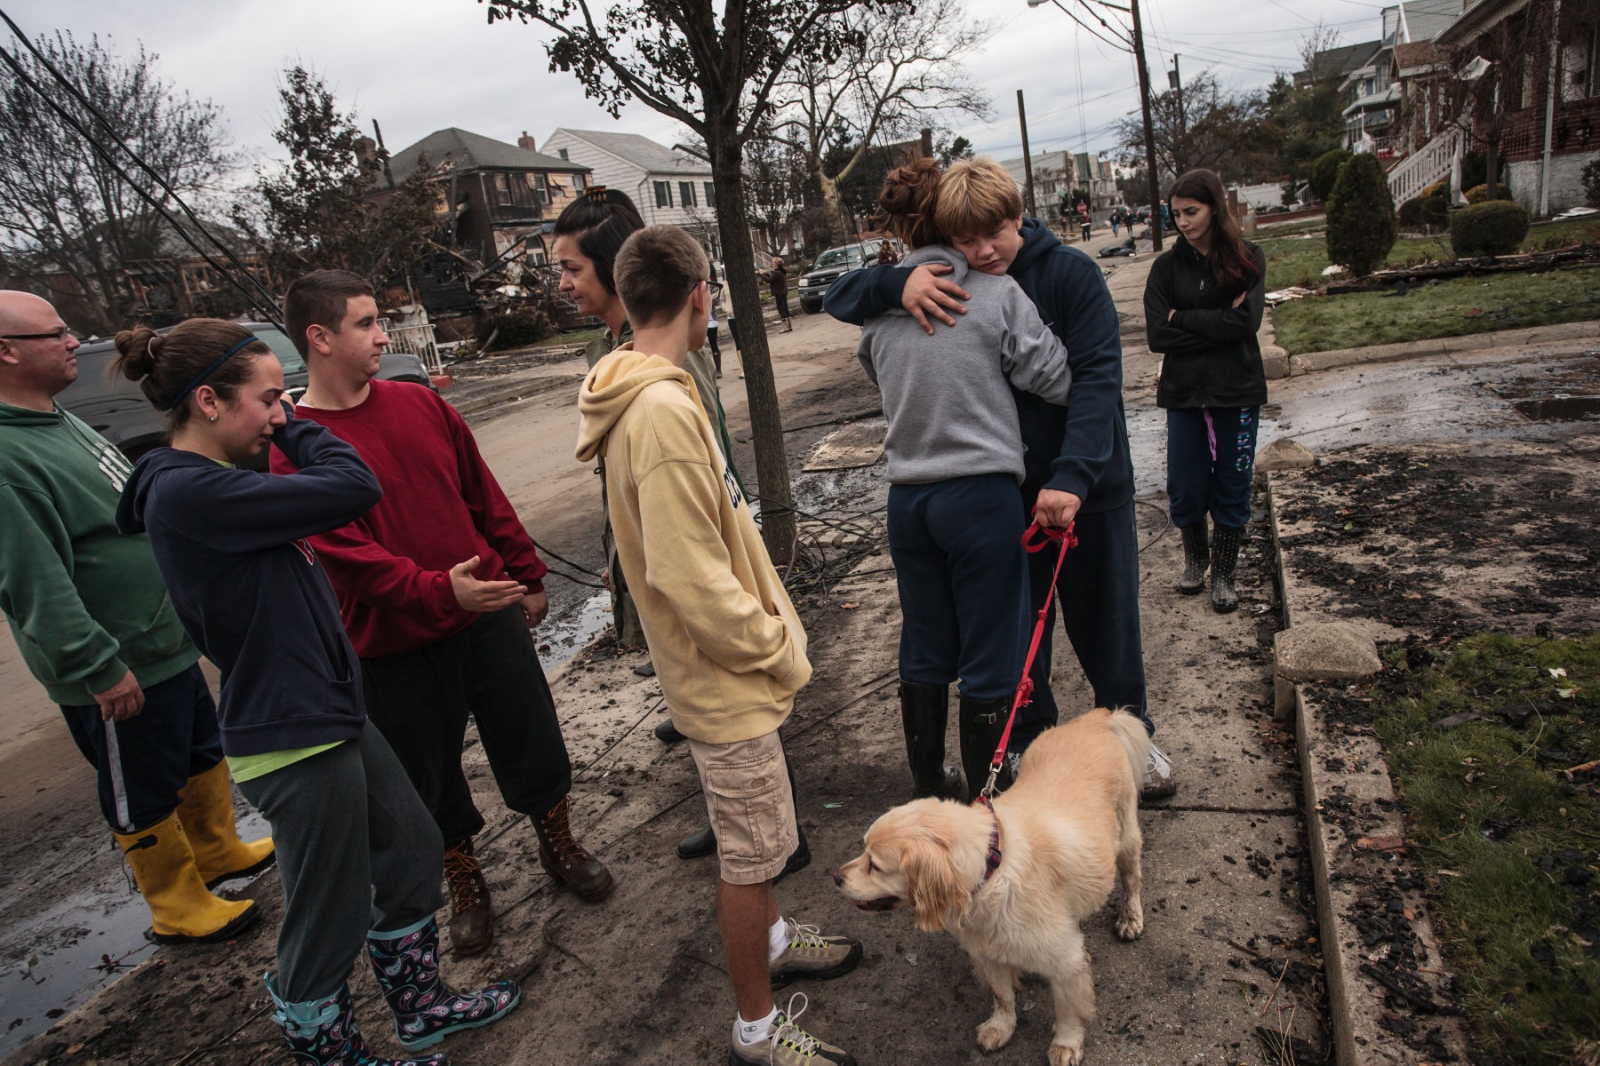 The Rockaways After Hurricane Sandy - Cassie and Victoria are greeted by friends on Beach 130th...